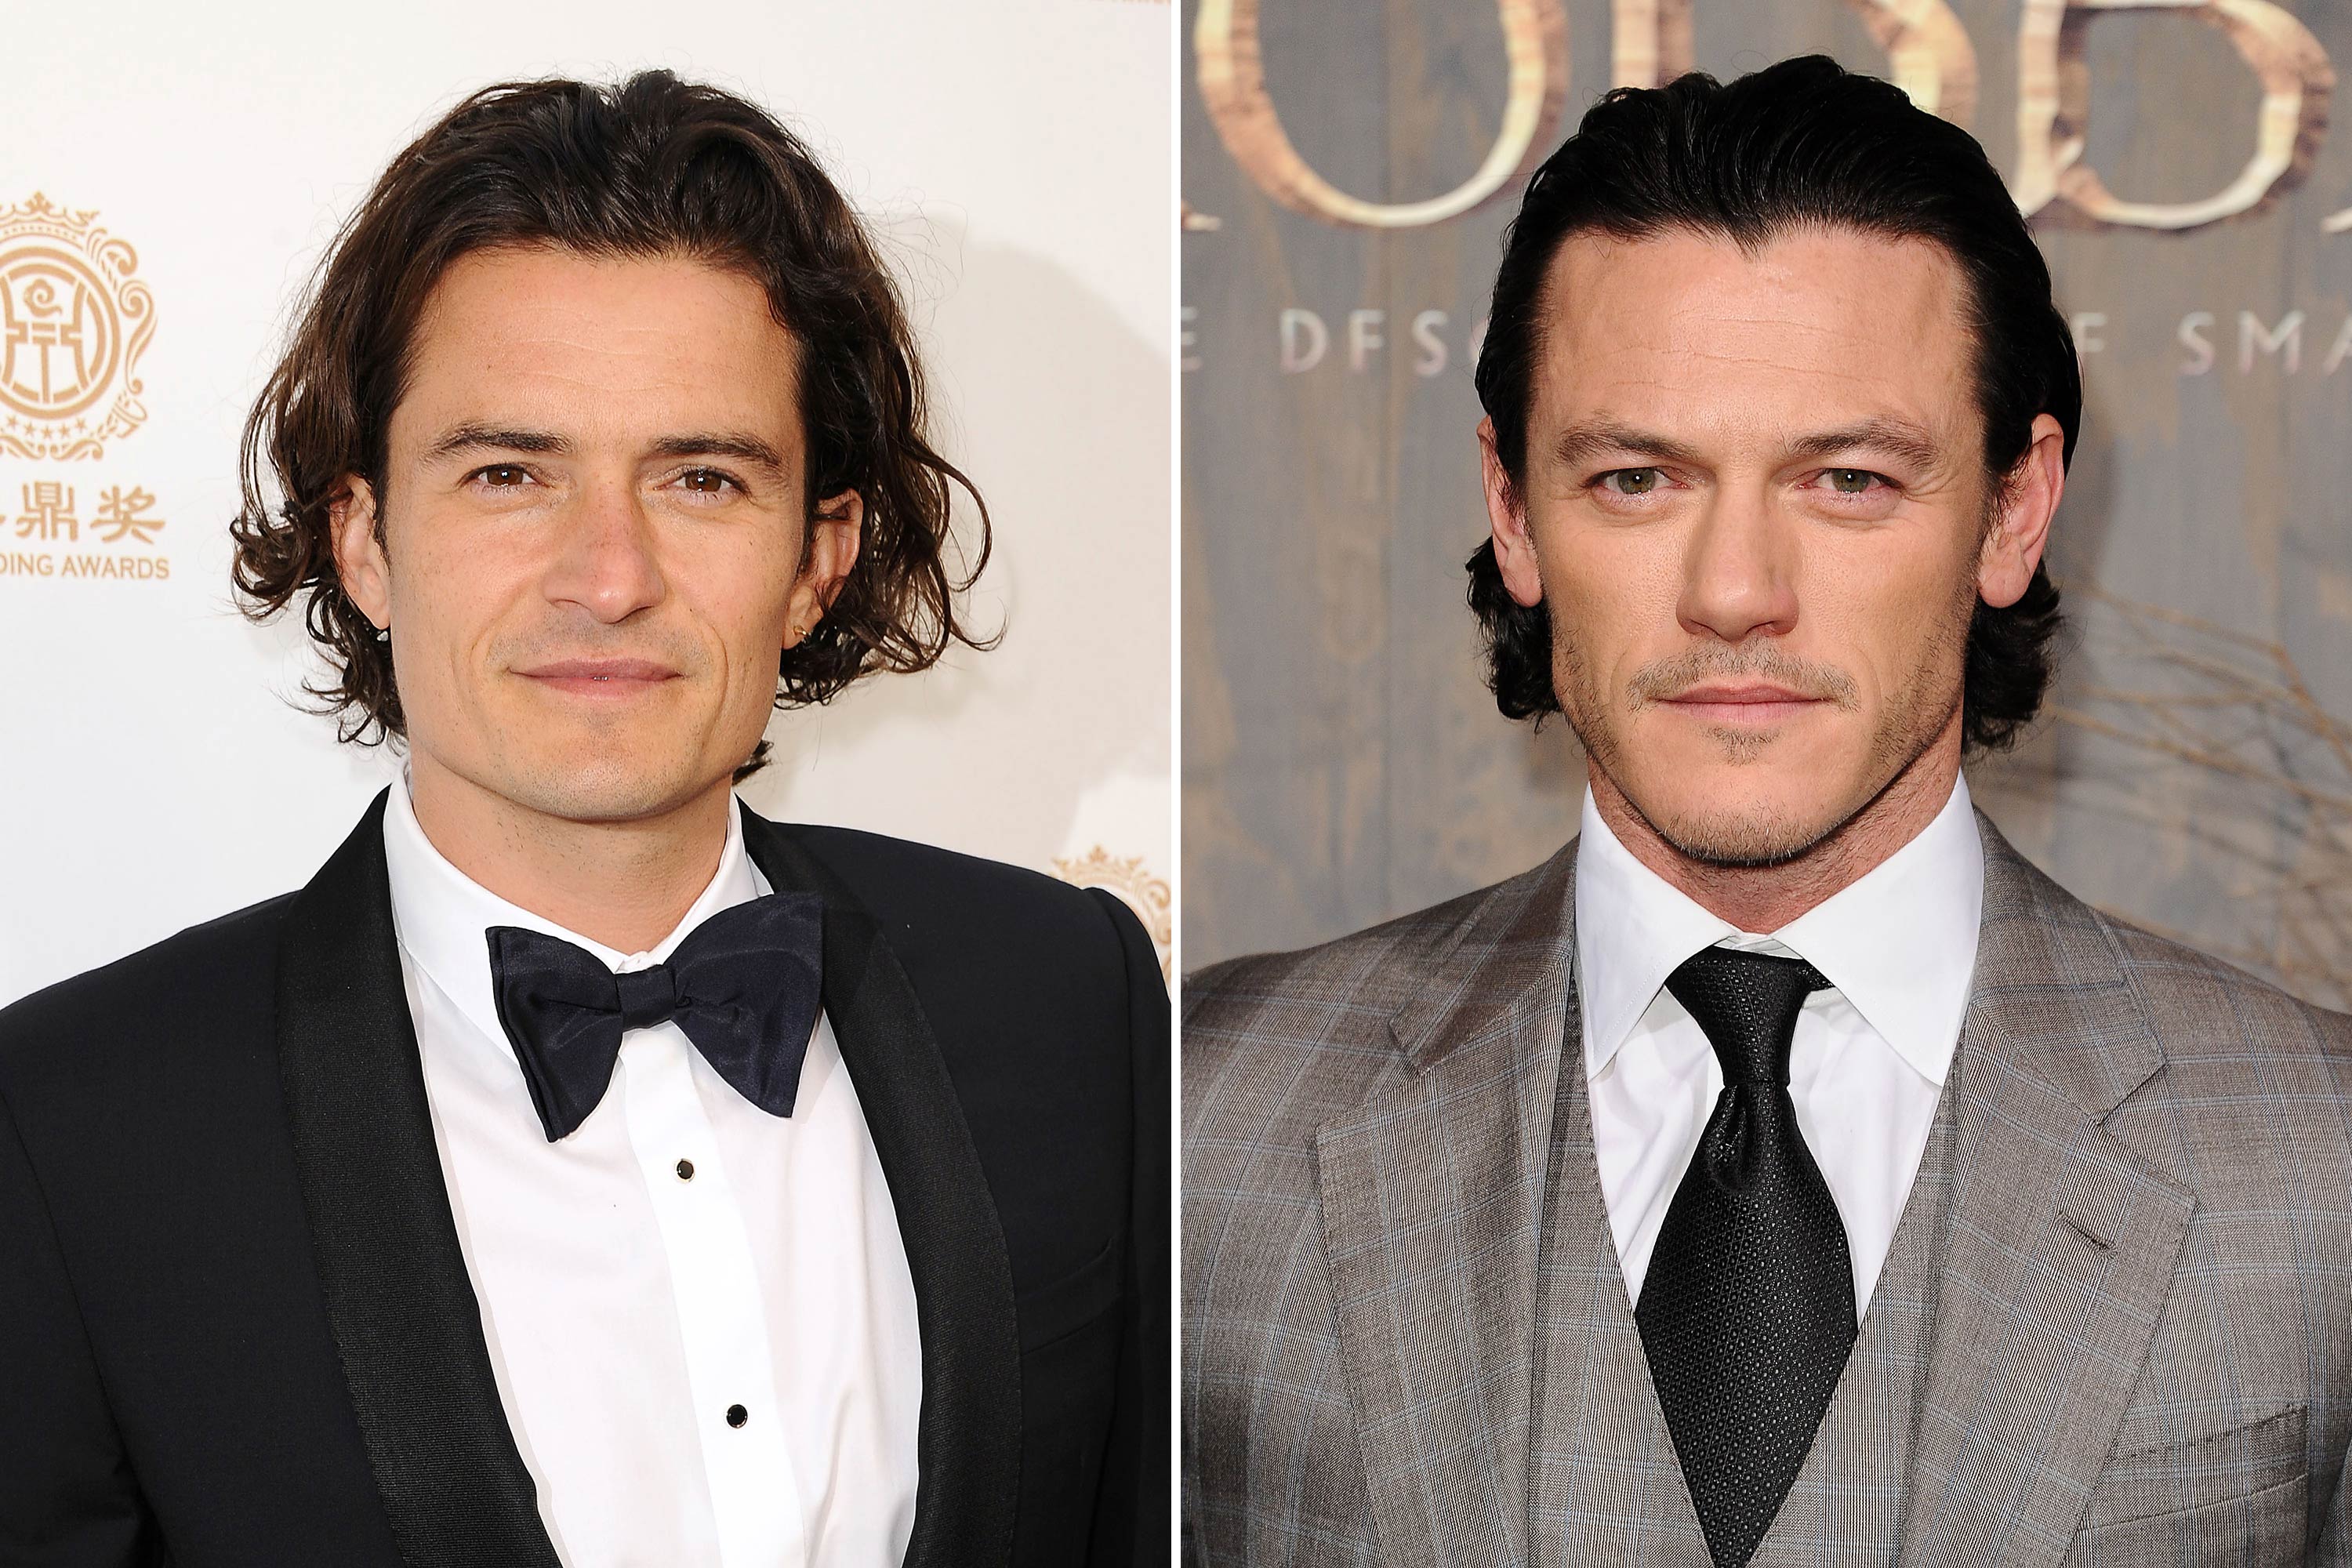 Luke Evans And Orlando Bloom Look Alike But They are Not Related 